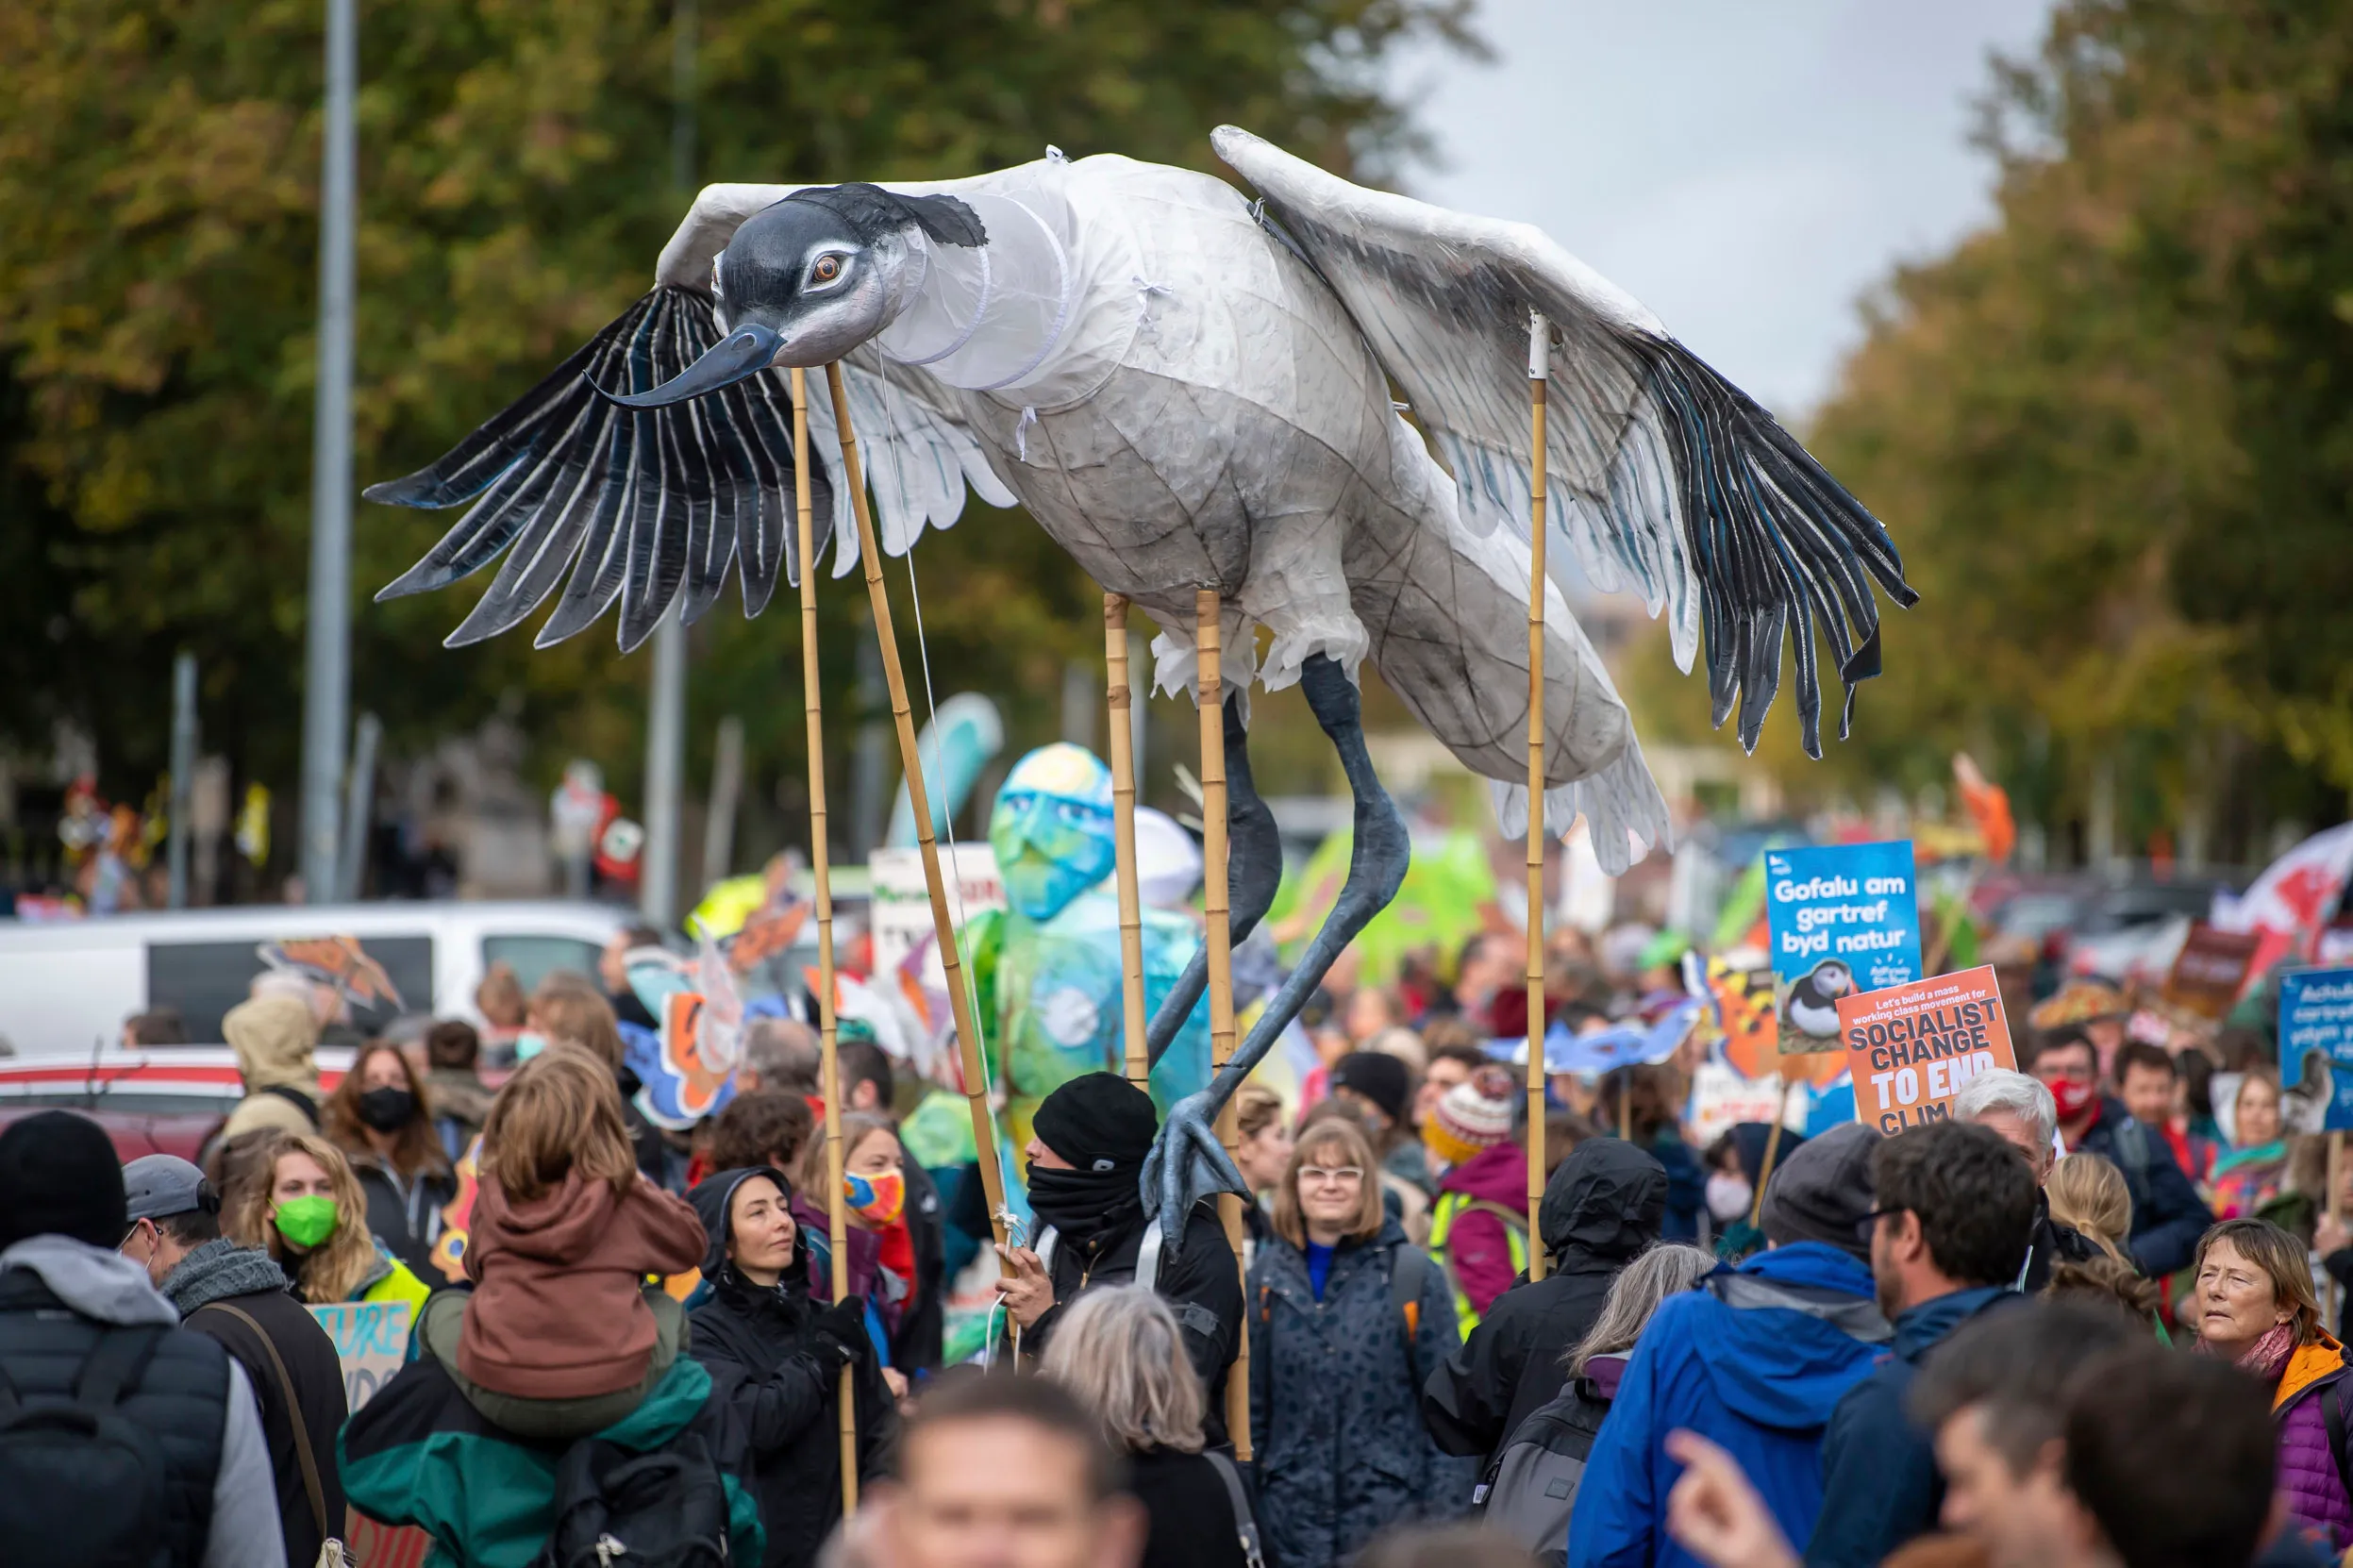 A crowd of people, marching, holding a large Avocet puppet above them using bamboo poles.